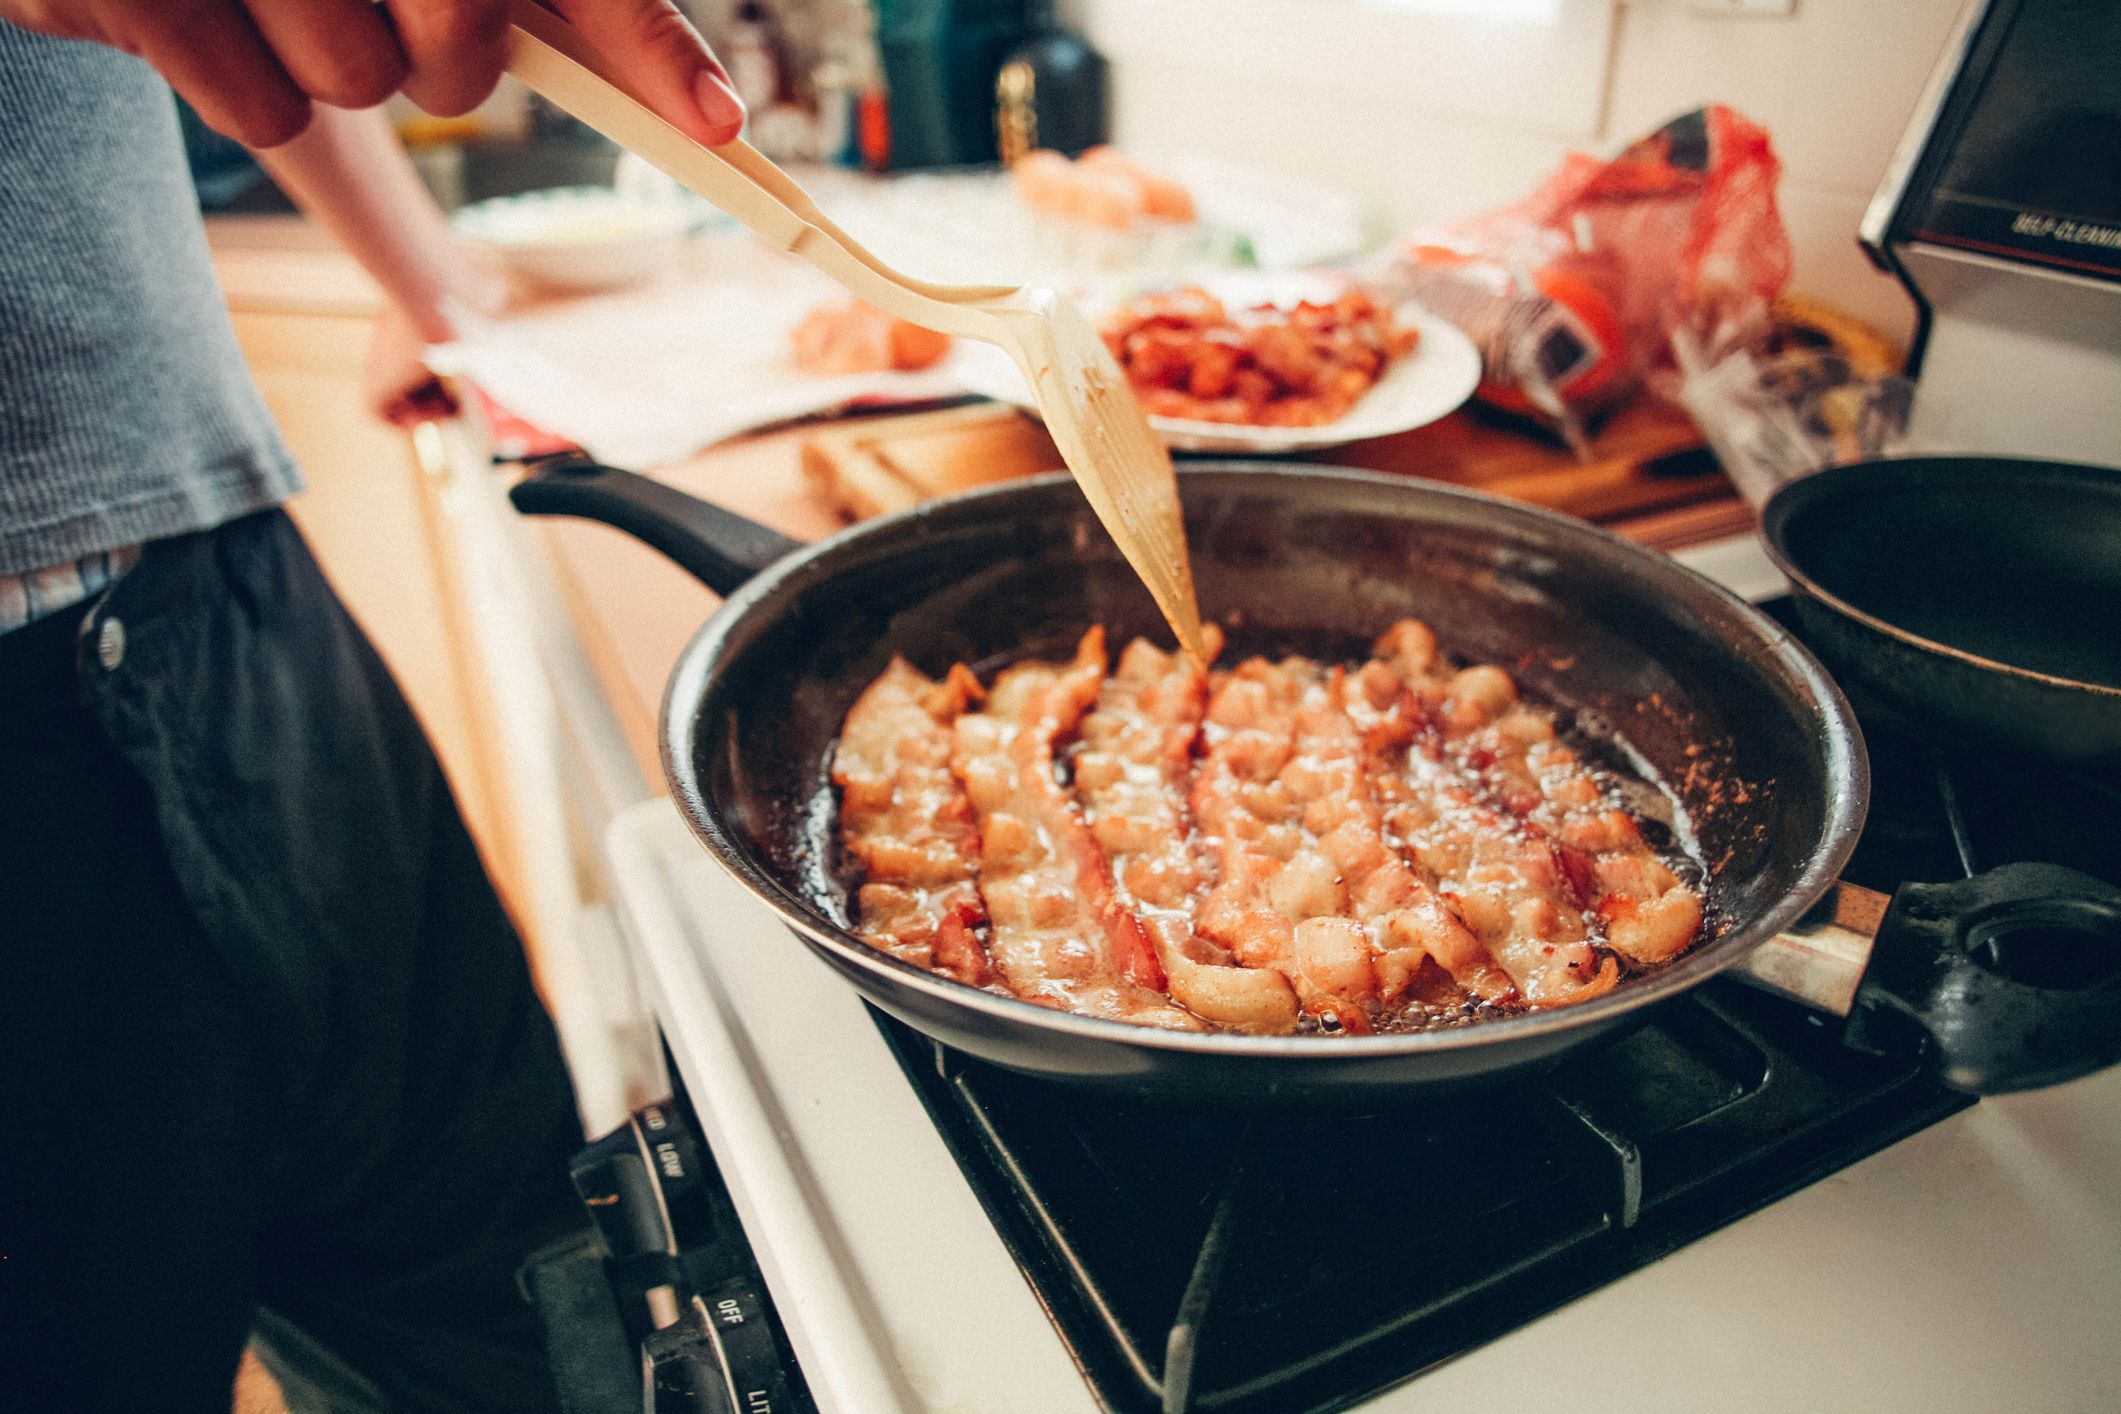 Cooking Bacon This Way Will Lower Your Cancer Risk.